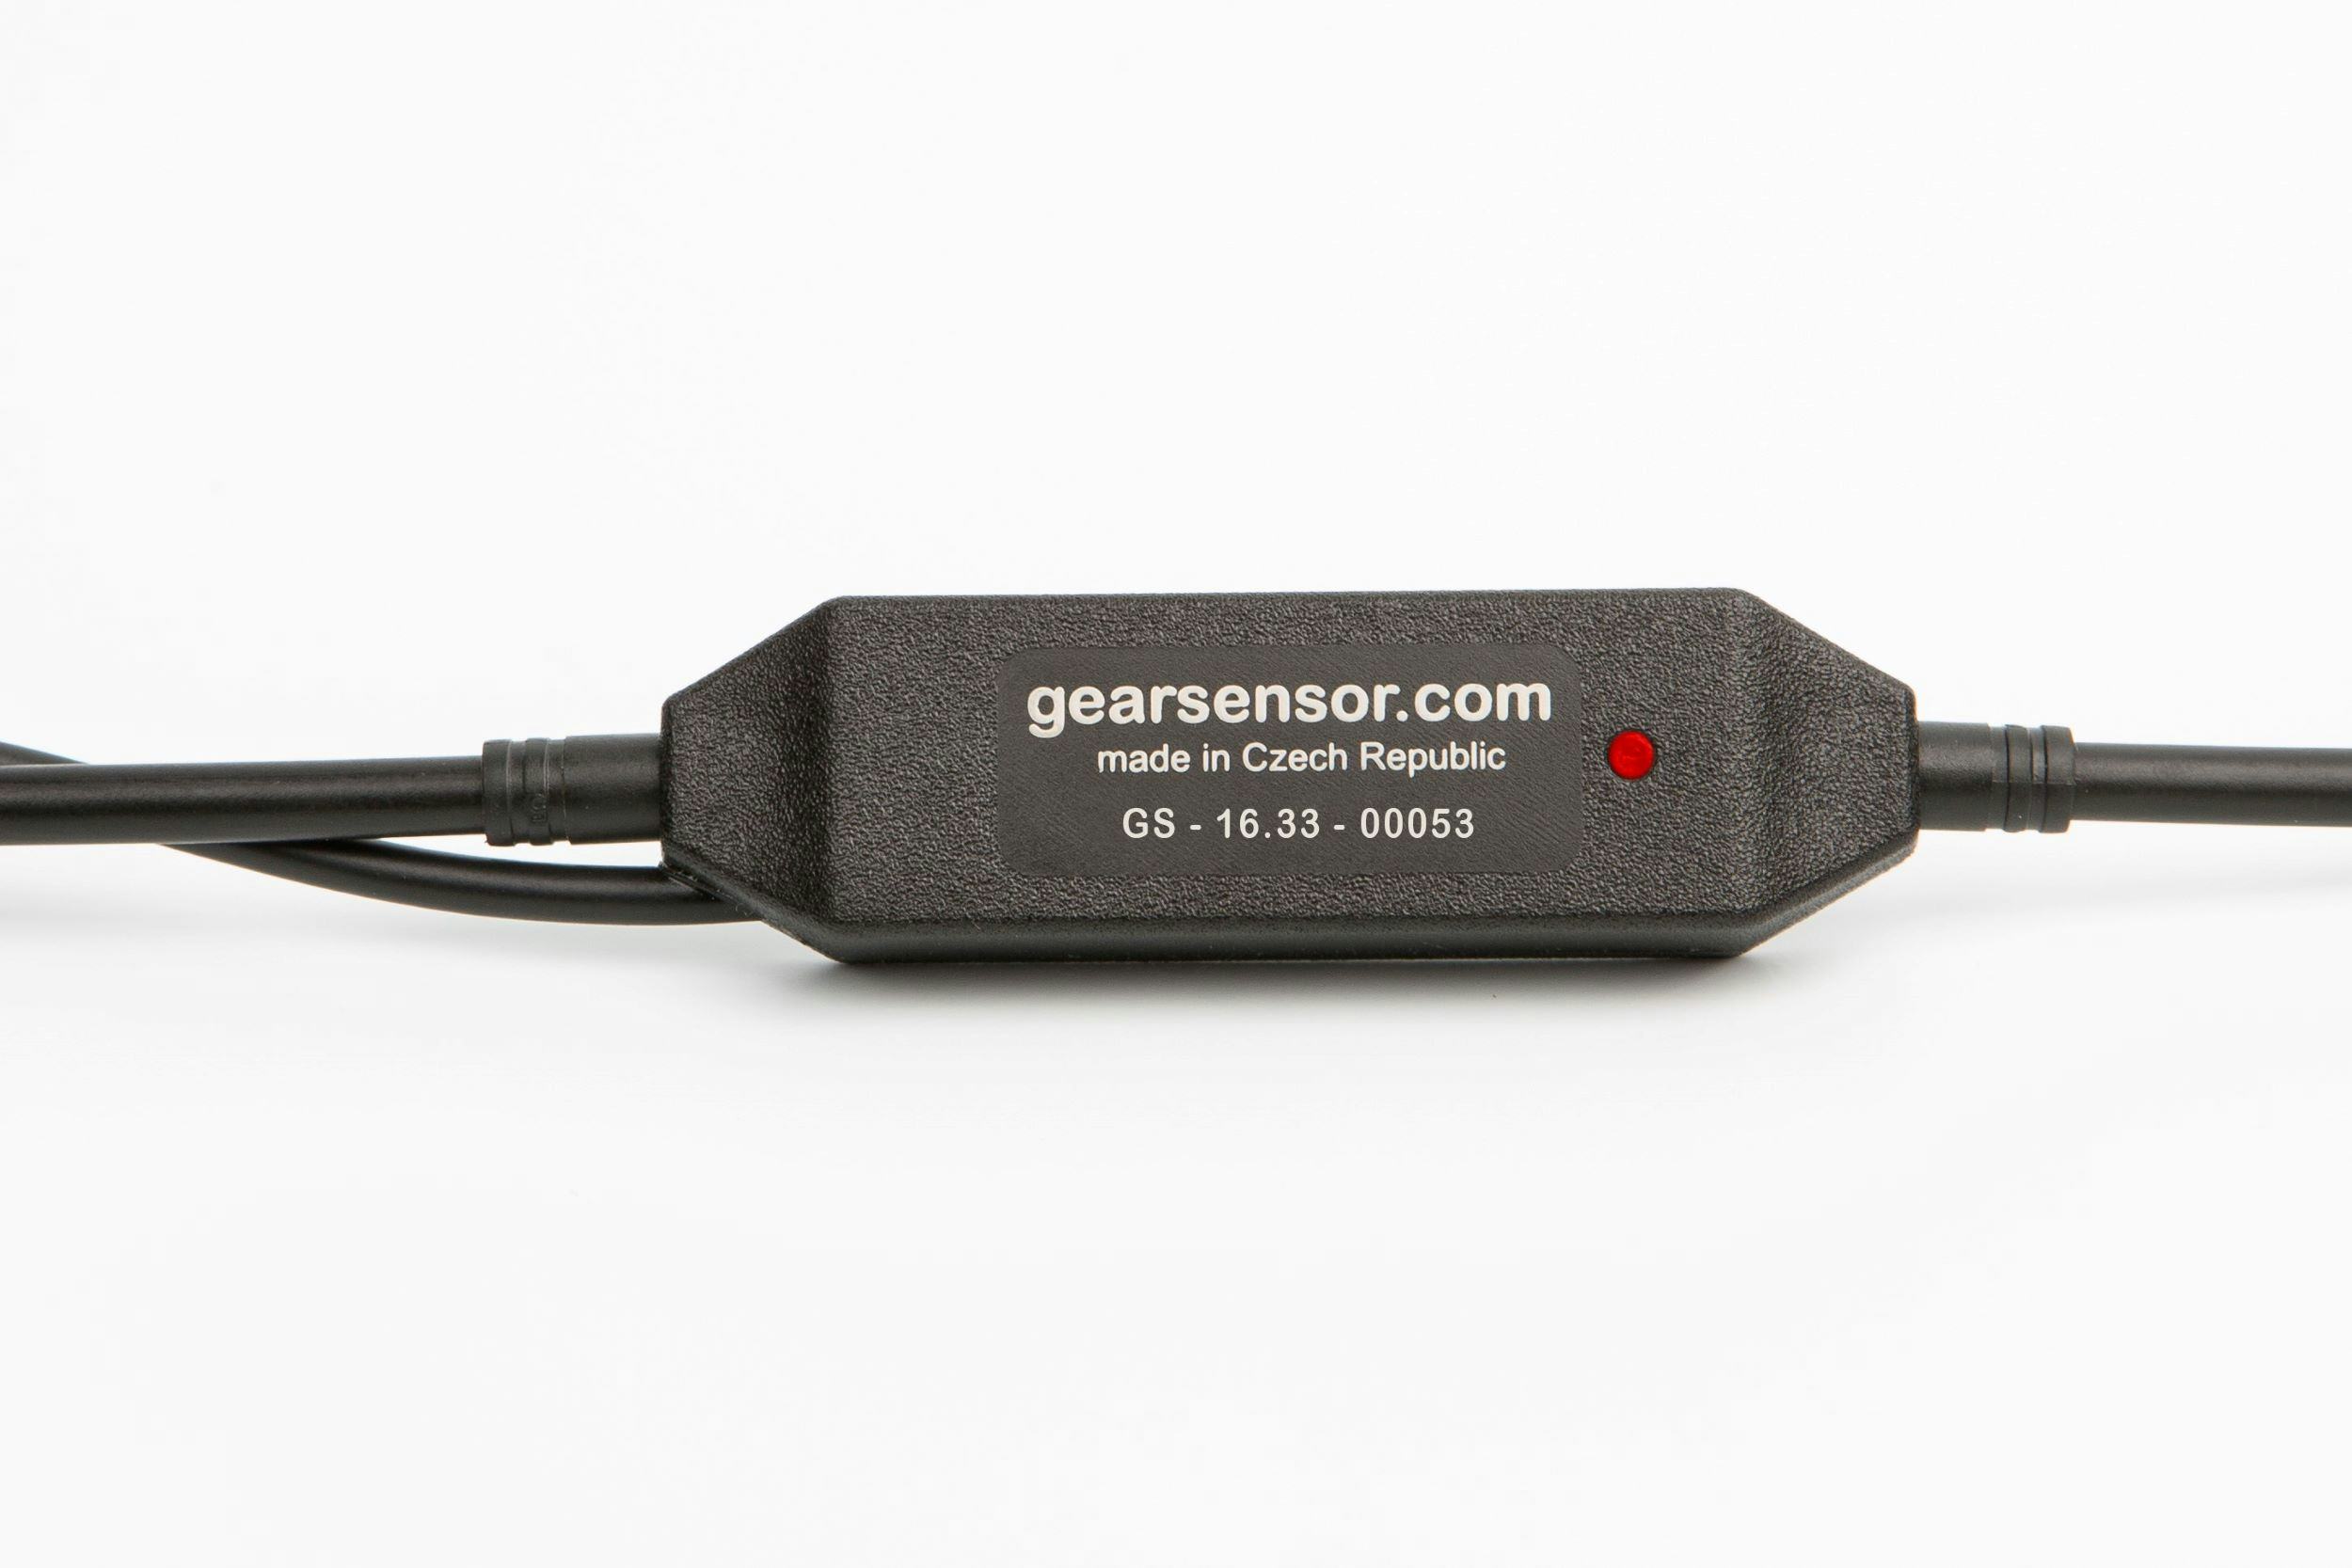 Gearsensors, which entered the market in 2013 are currently used by more than 100 e-bike brands. - Photo Gearsensors.com